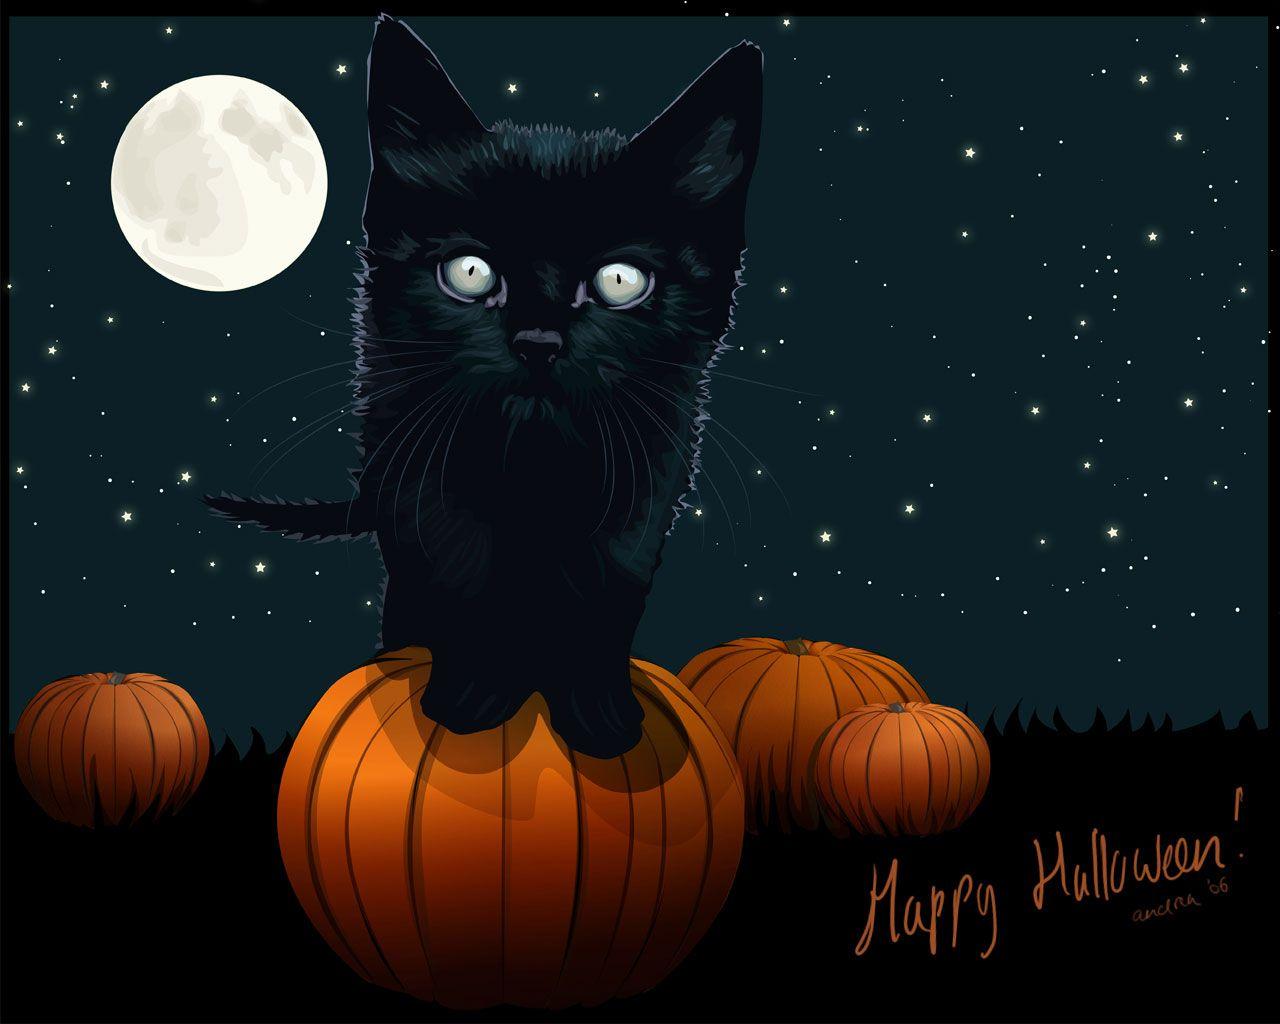 You are currently viewing Halloween Witch and Cat Halloween cat scary moon cute profile wallpapers desktop backgrounds whimsical spooky illustration themes happy kunst kawaii poems status wallpapercave vector